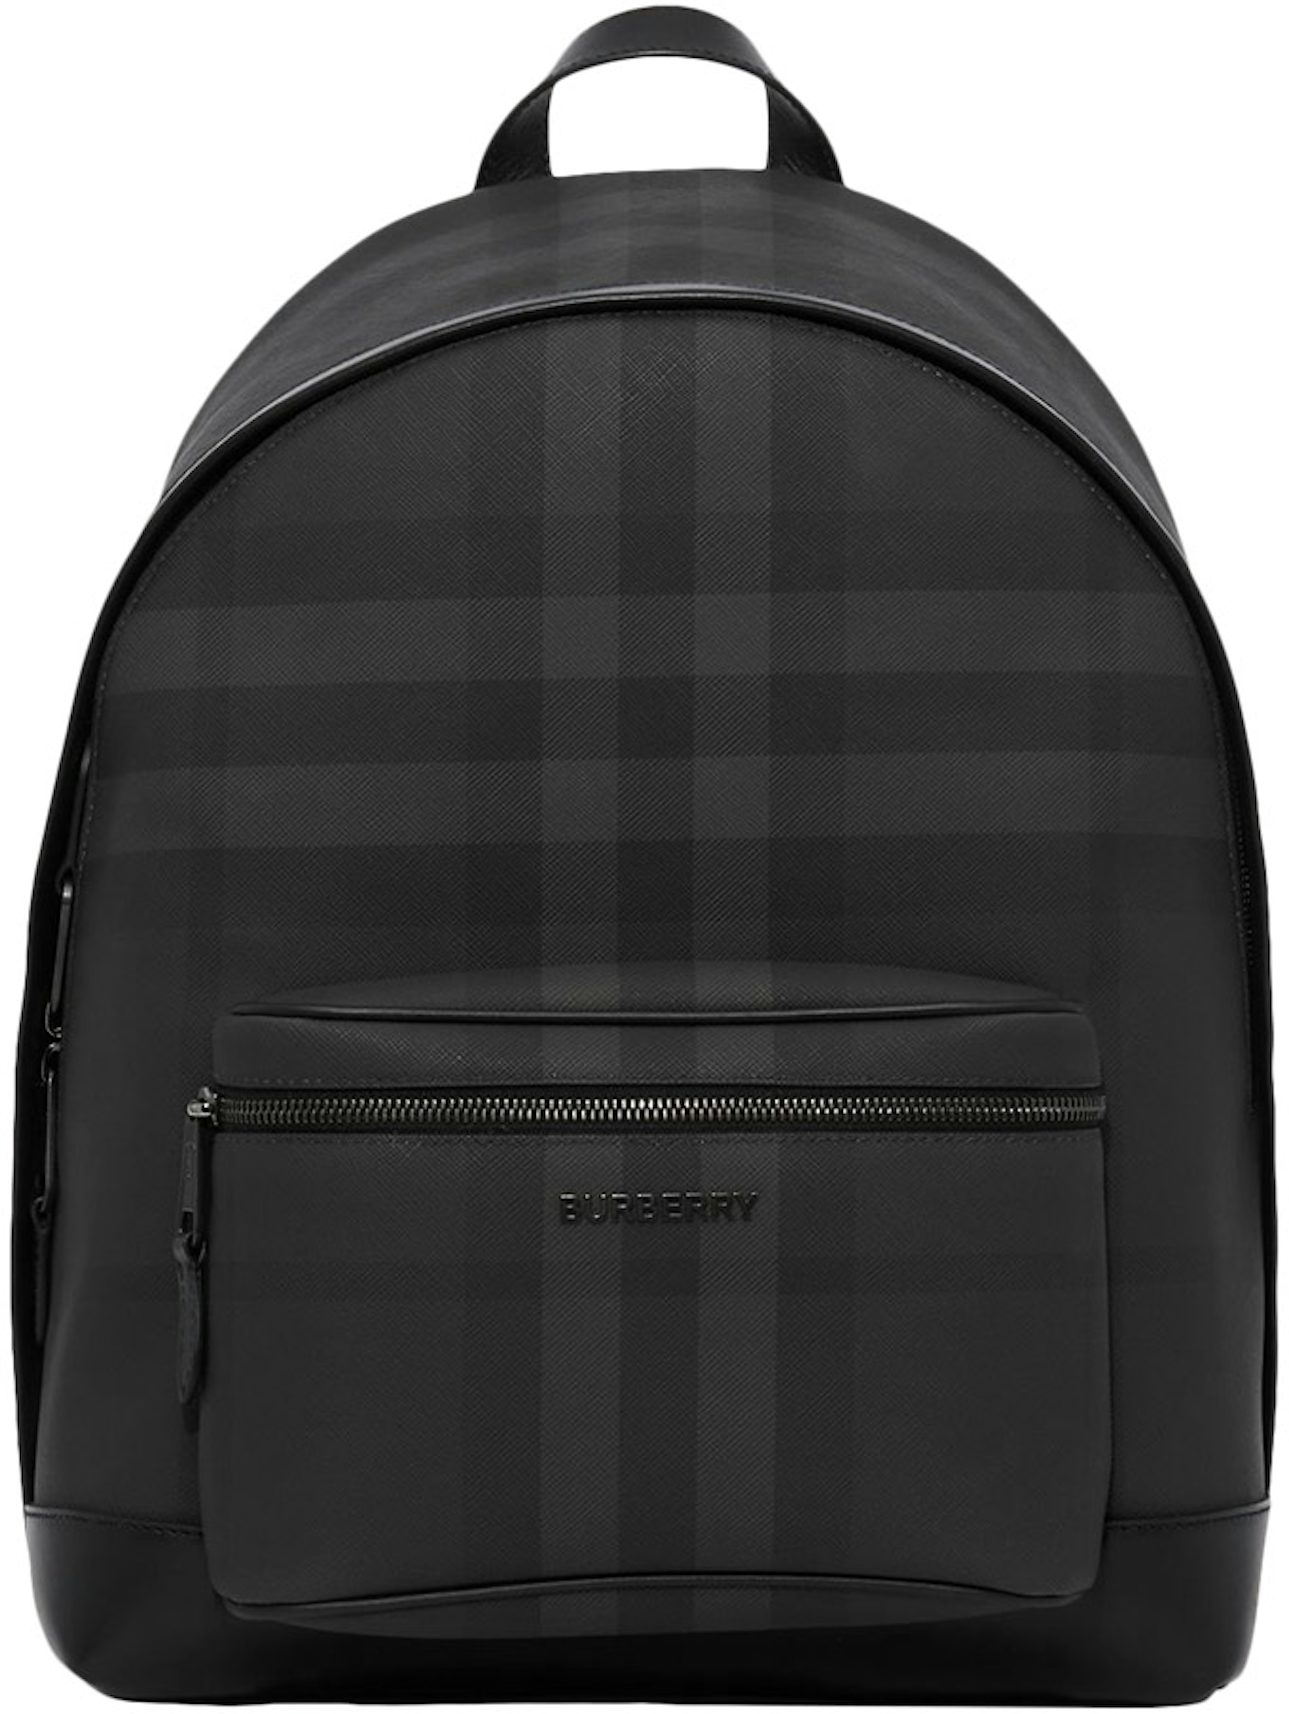 Burberry Charcoal Check and Leather Backpack Charcoal